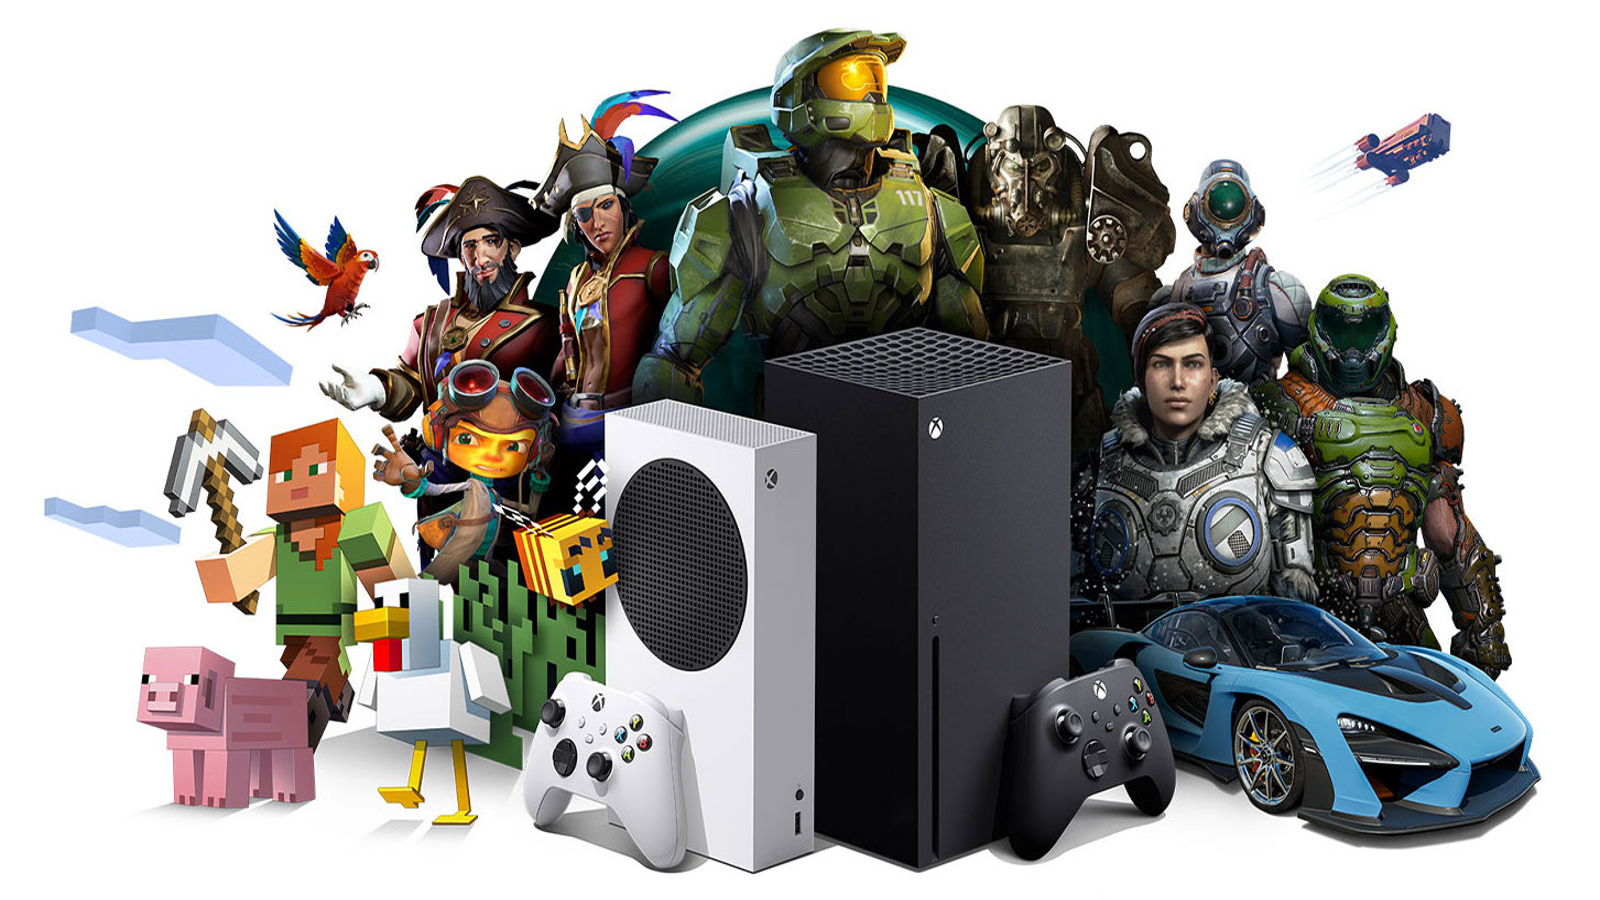 Microsoft Claims 50 Games Coming To Xbox In 2022 And 2023